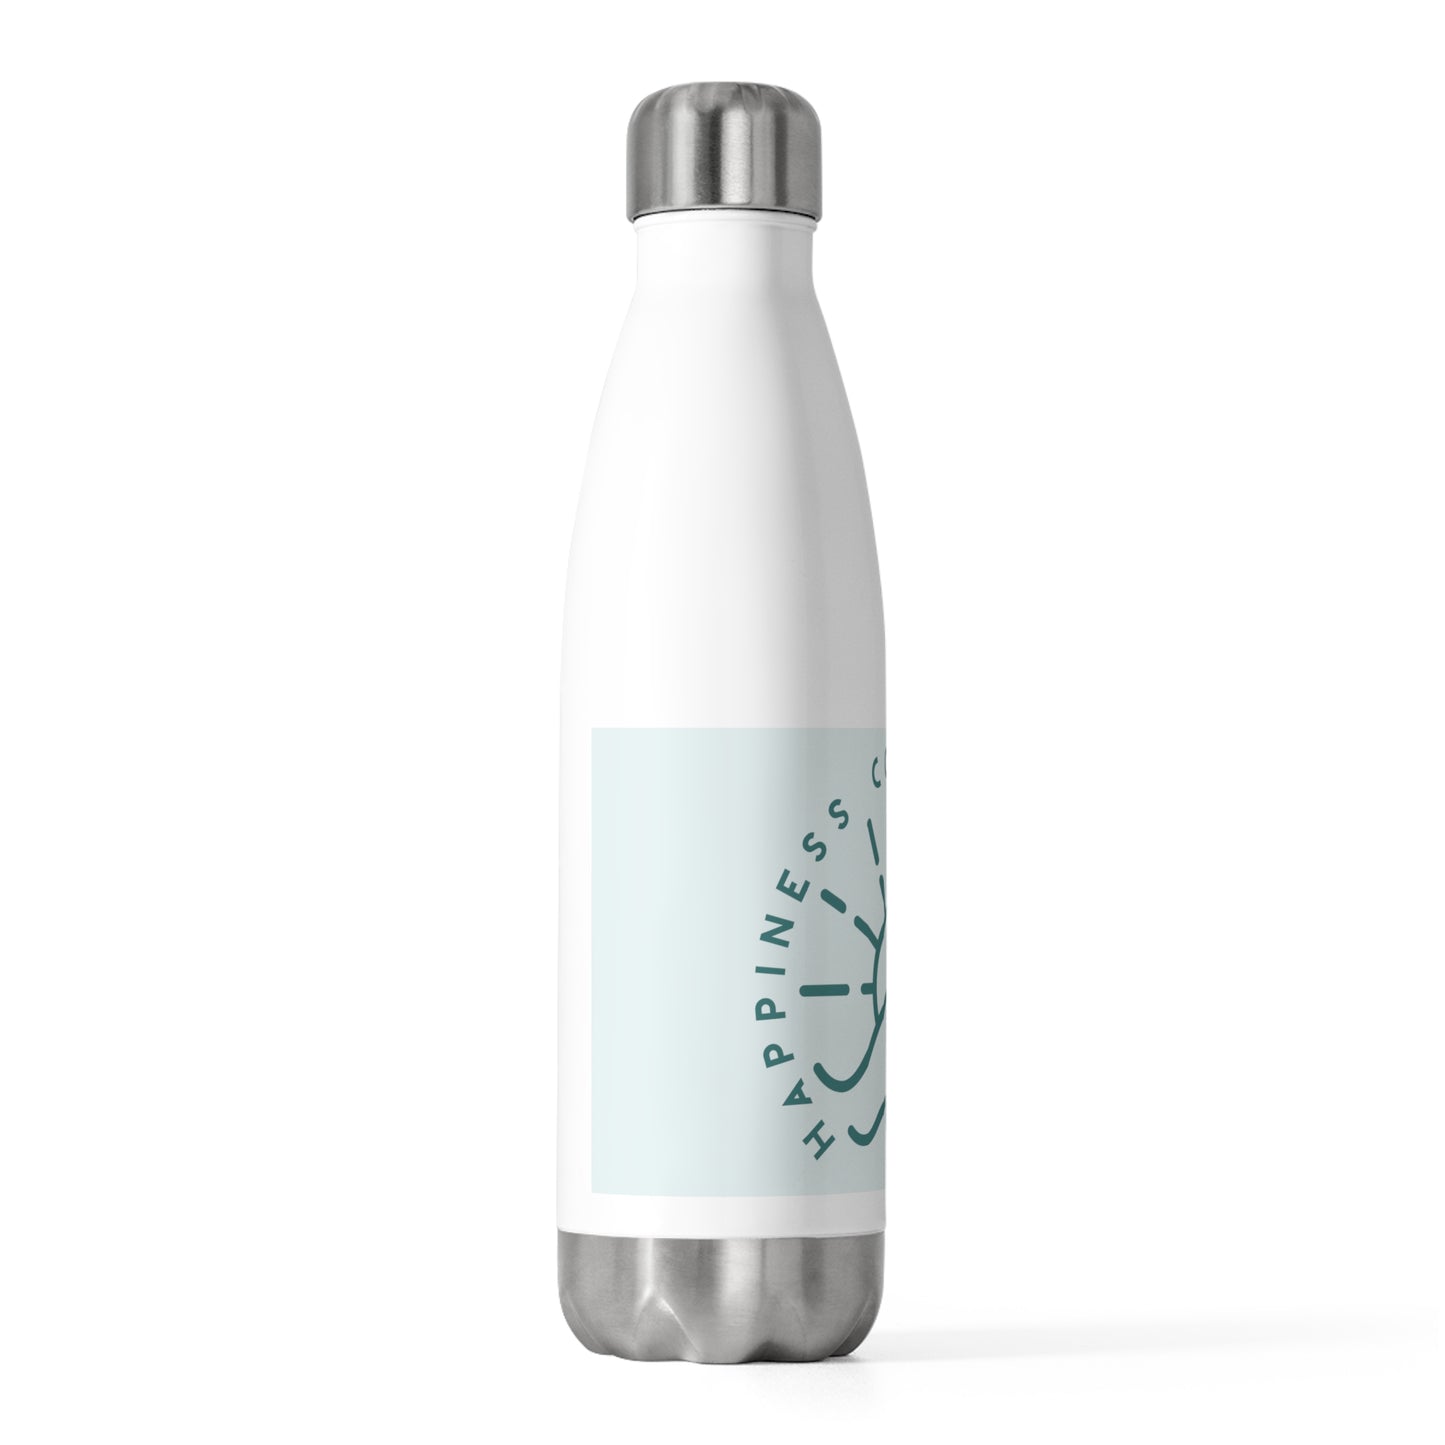 Waves 20oz Insulated Bottle